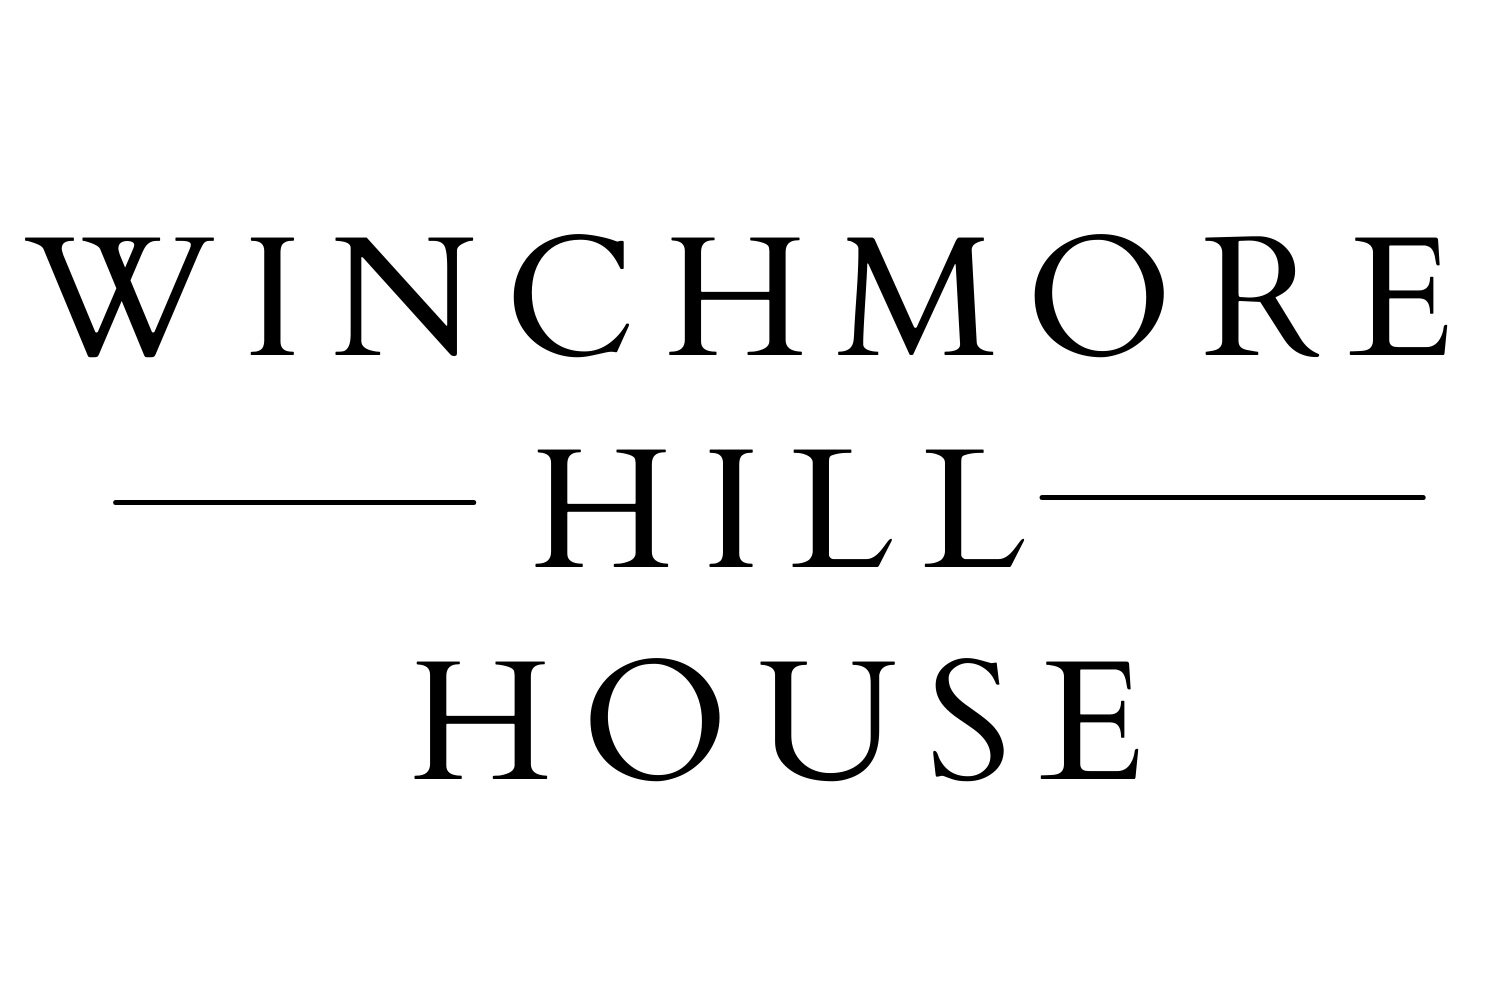 Winchmore Hill House